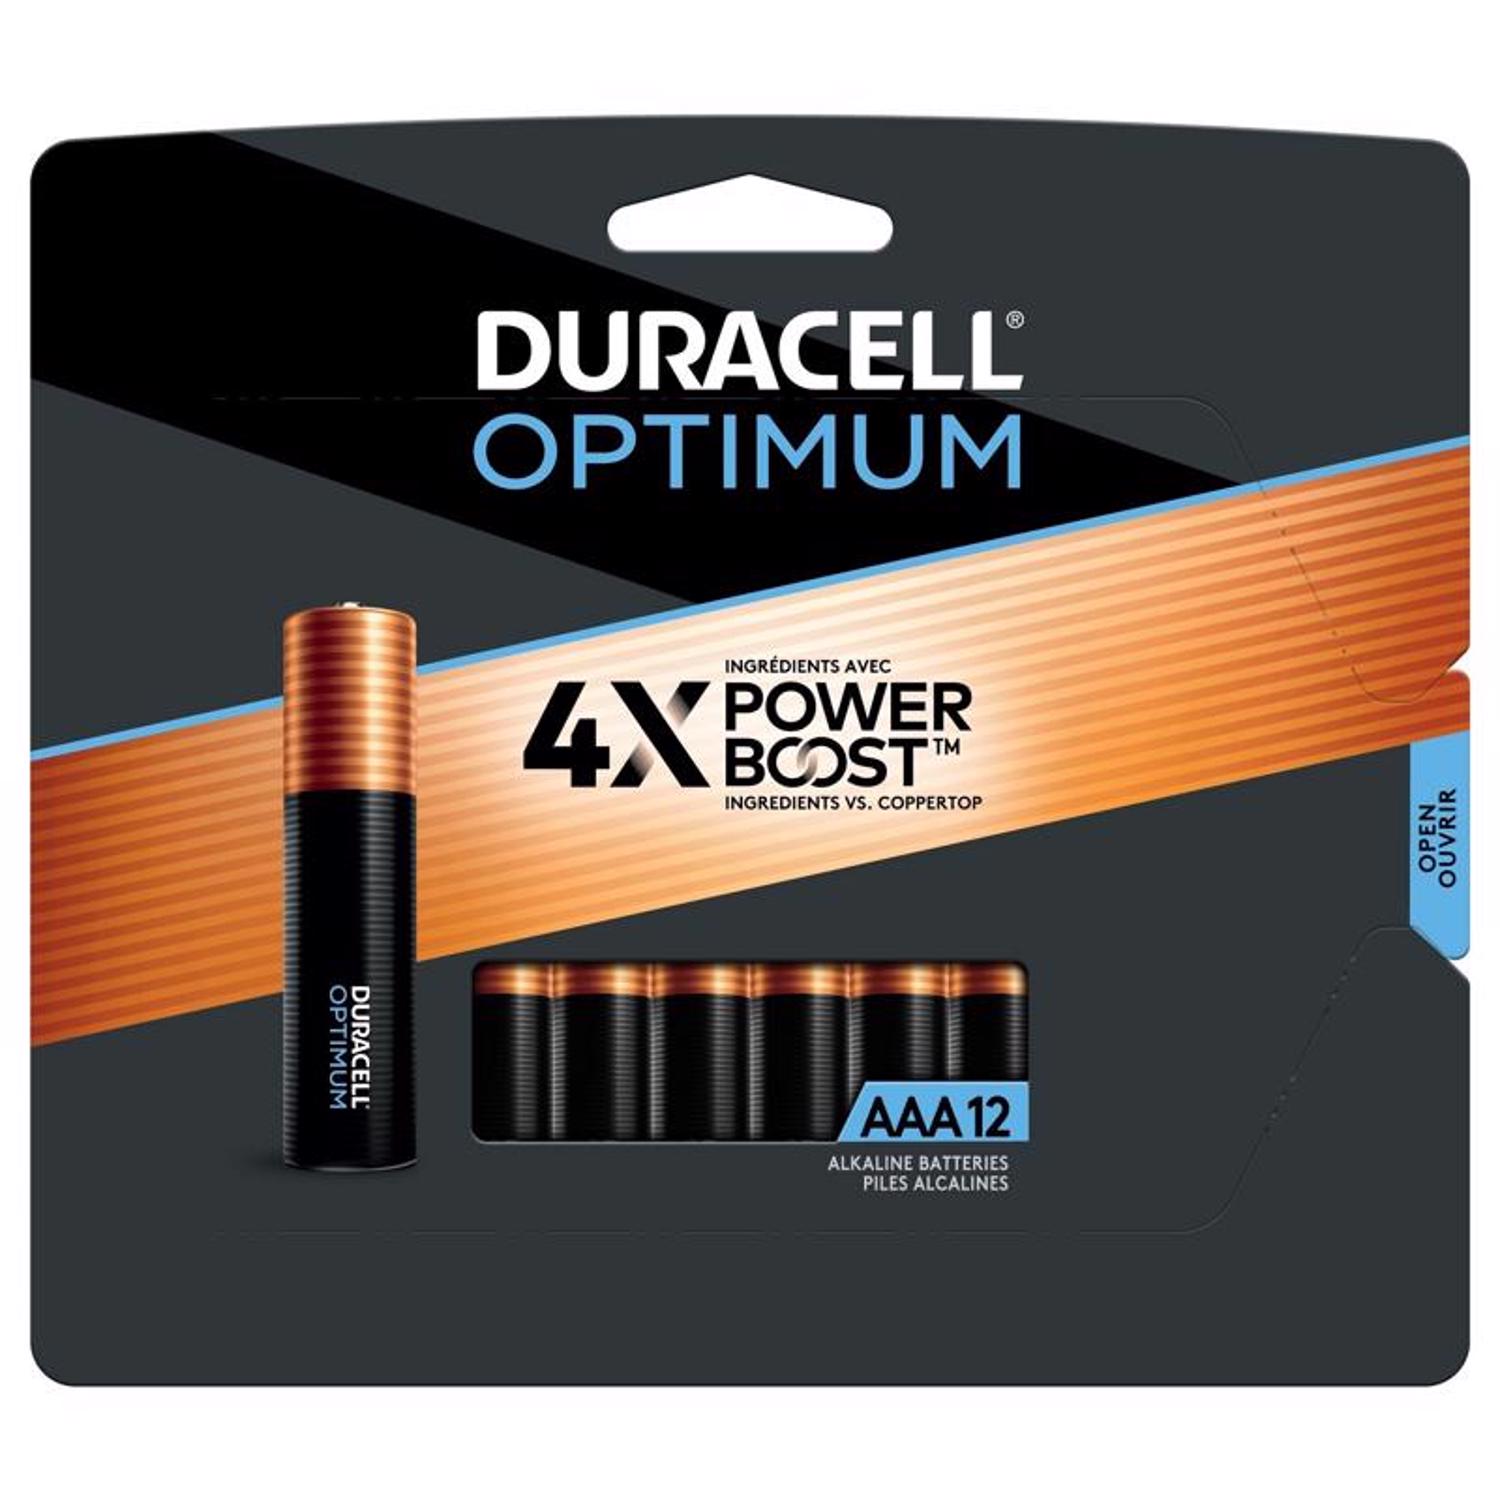 Photos - Household Switch Duracell Optimum AAA Alkaline Batteries 12 pk Carded 032662 